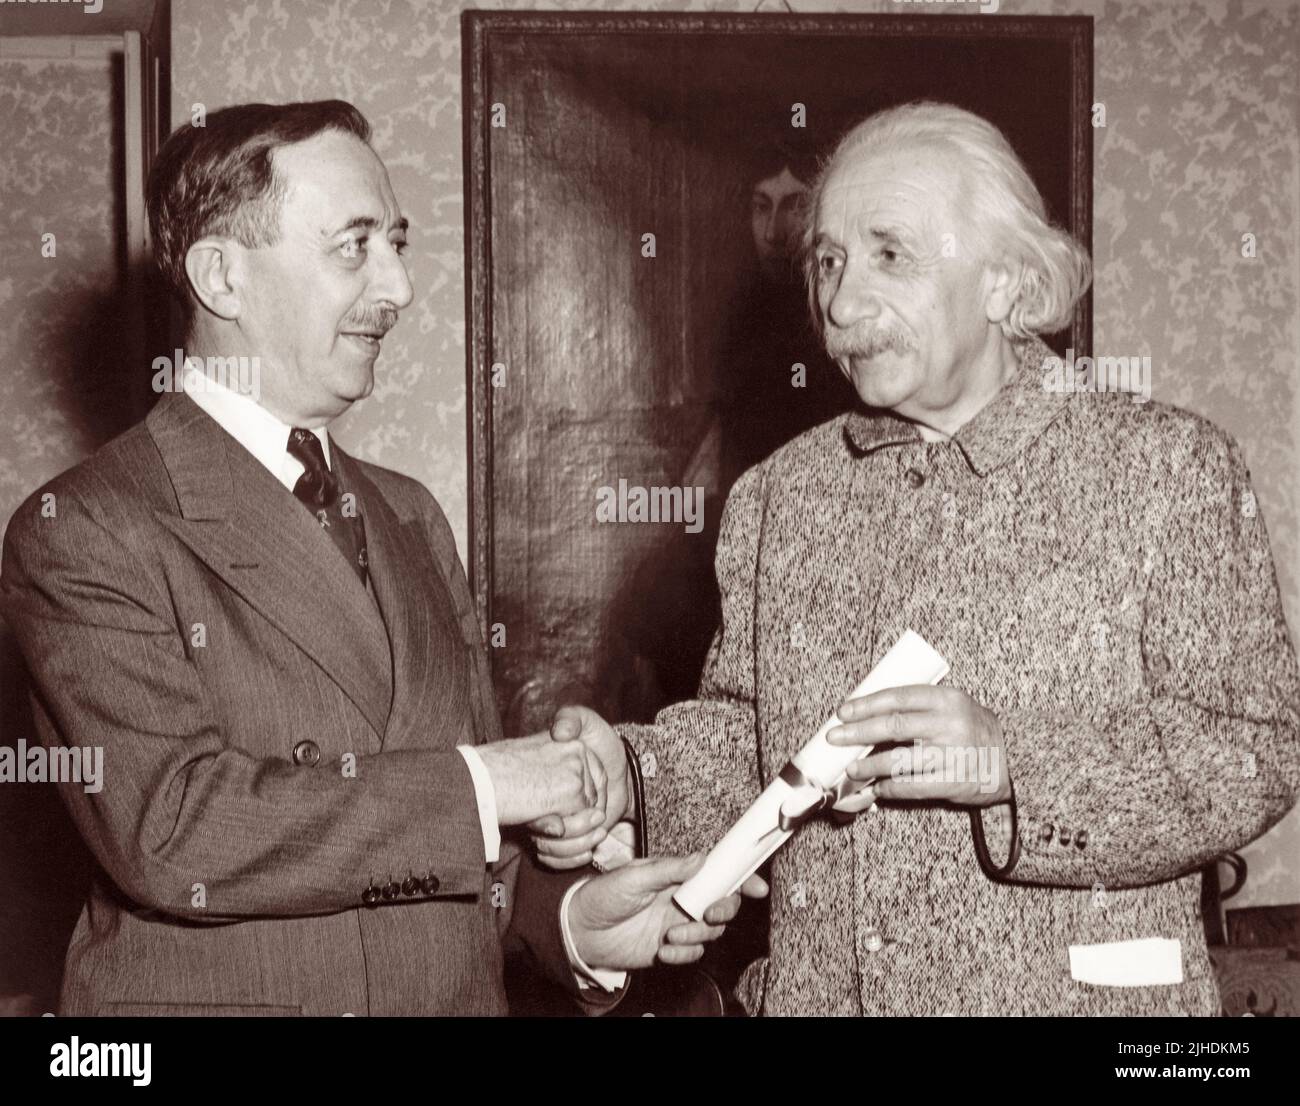 Albert Einstein (1879-1955) receiving an honorary Doctor of Philosophy degree from the Hebrew University of Jerusalem by Israel S. Wechsler at Einstein's Princeton home in March, 1949. (USA) Stock Photo